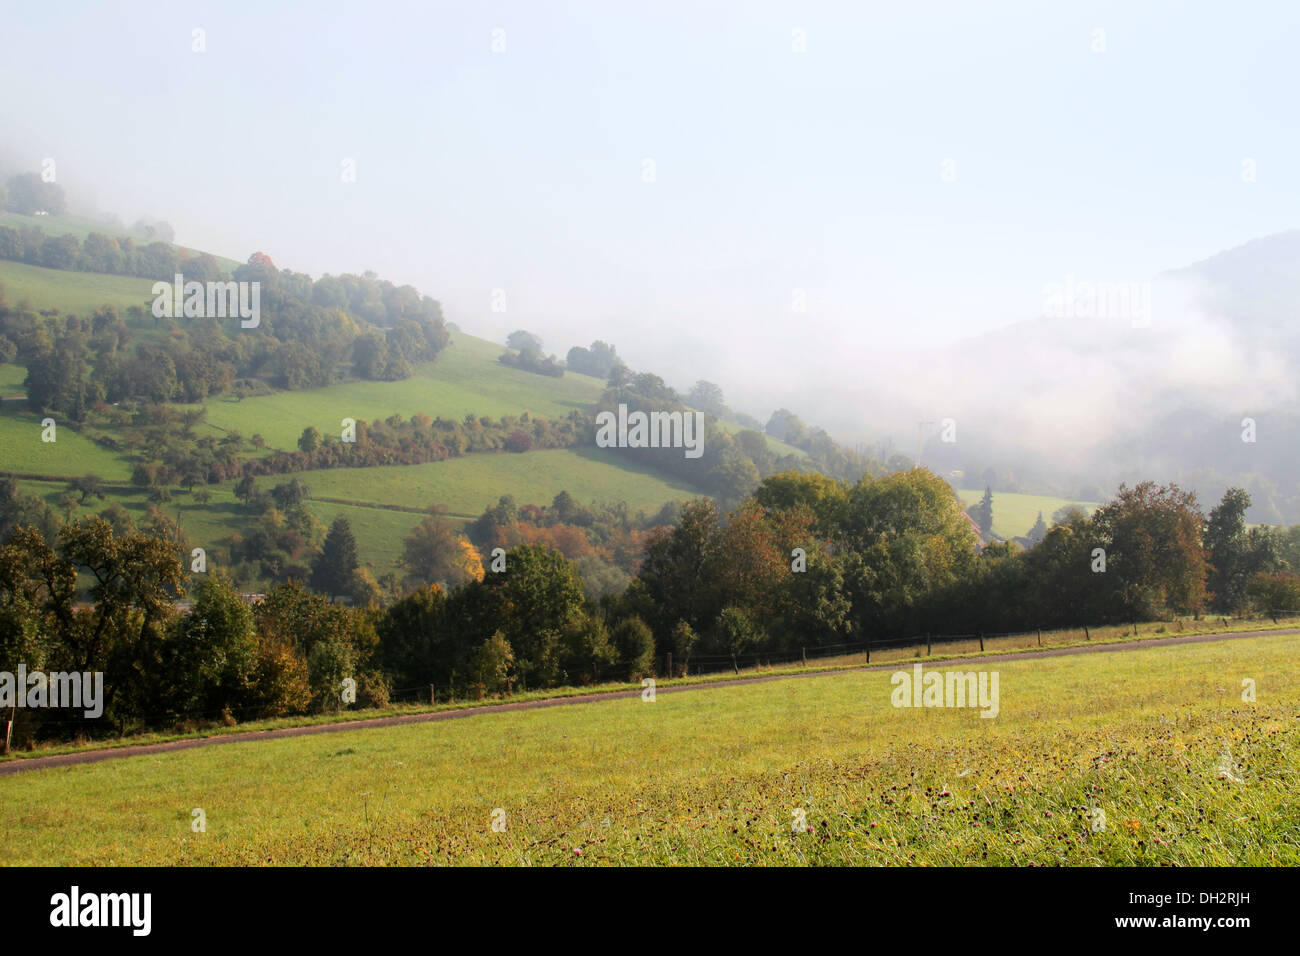 area named Hohenlohe at autumn time in Germany Stock Photo